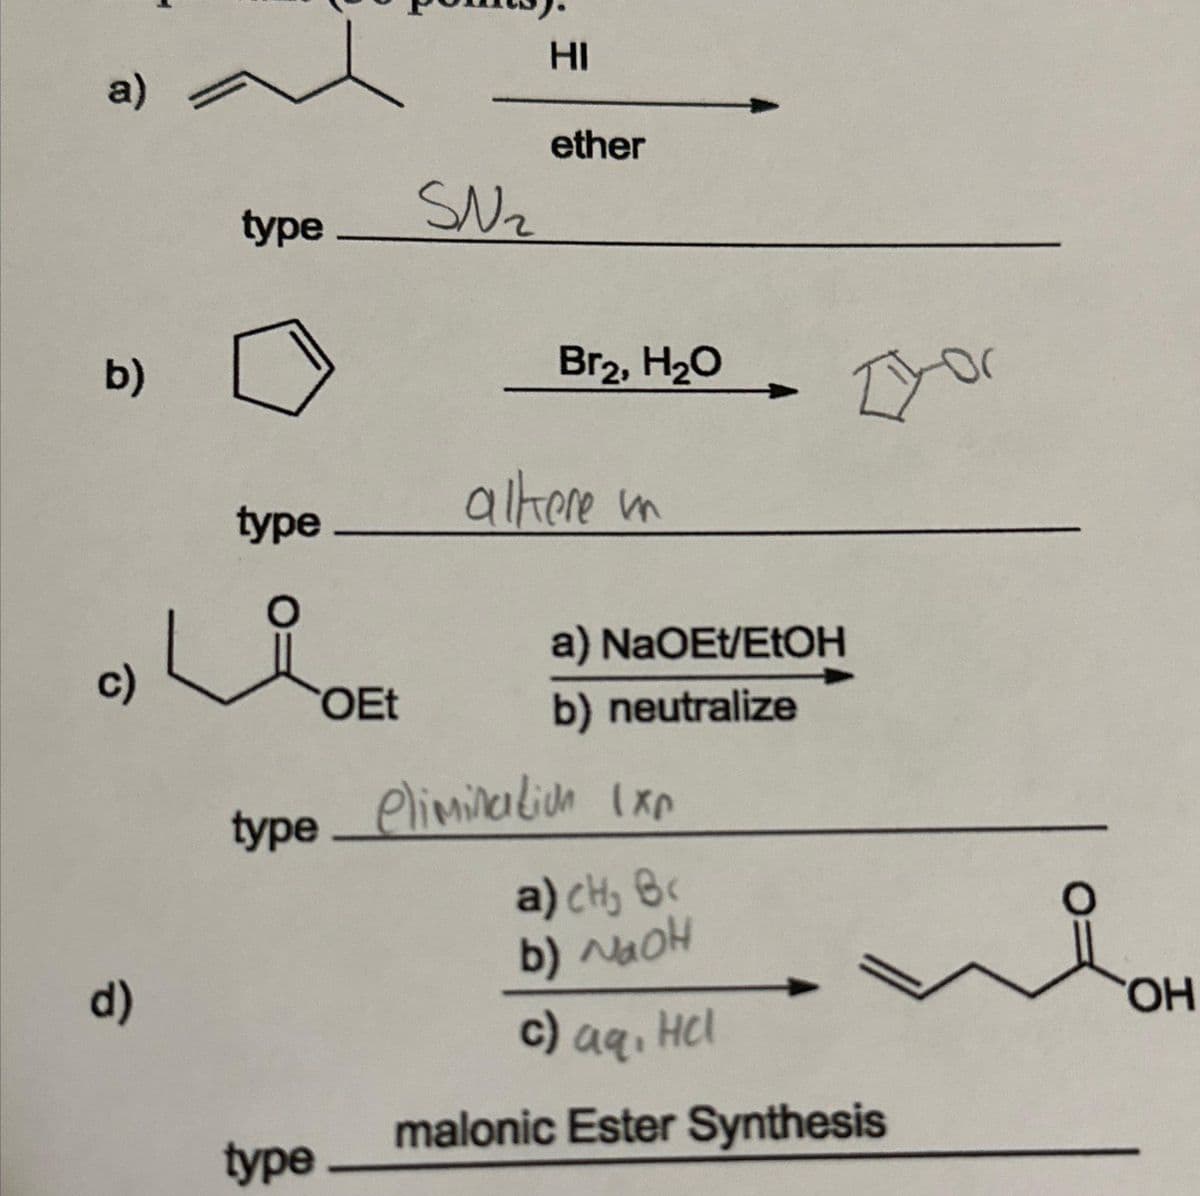 a)
b)
c)
d)
type
type
OEt
type
SN ₂
HI
ether
Br₂, H₂O
alkere in
a) NaOEt/EtOH
b) neutralize
type elimination Ixp
a) cH₂ B‹
b) NaOH
you
c) aq.
malonic Ester Synthesis
aq, HCl
OH